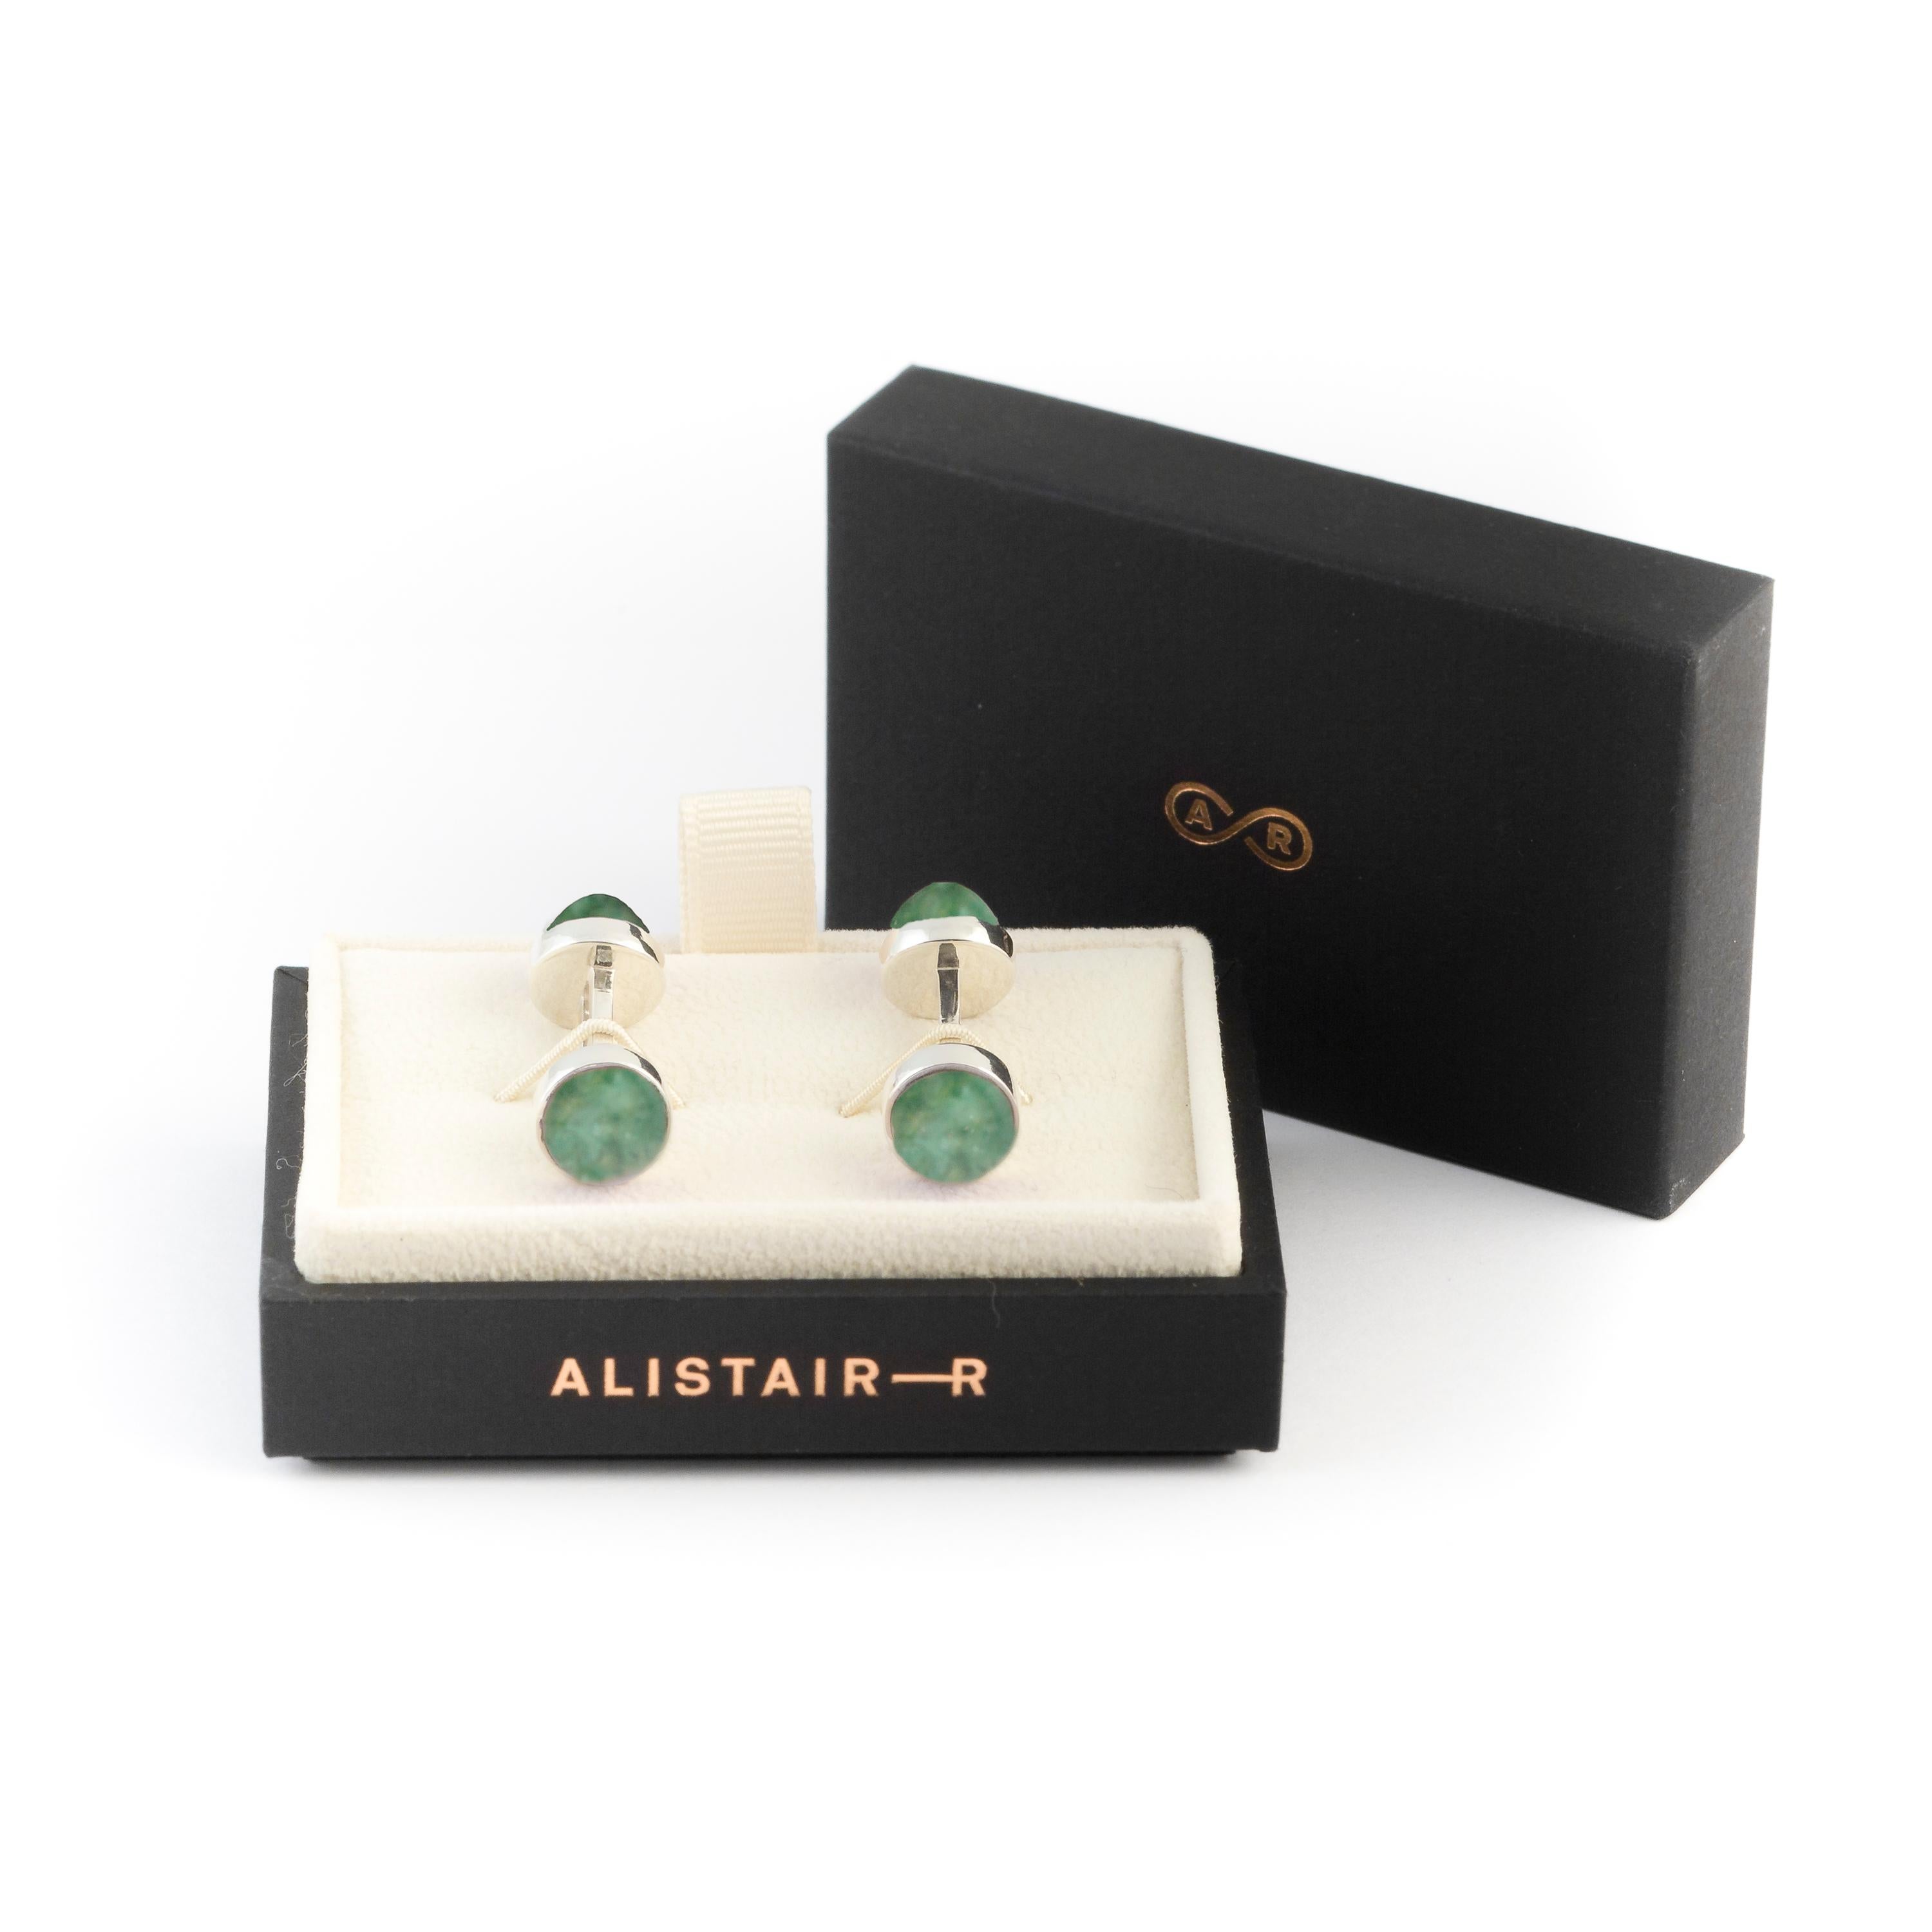 Double-sided Round Cabochon Aventurine cufflinks from the Cairn Collection

Our elegant cufflinks are designed and handmade in our UK workshop. The Cairn cufflinks are double sided; with two round cabochon cut stones set into a classic bezel setting